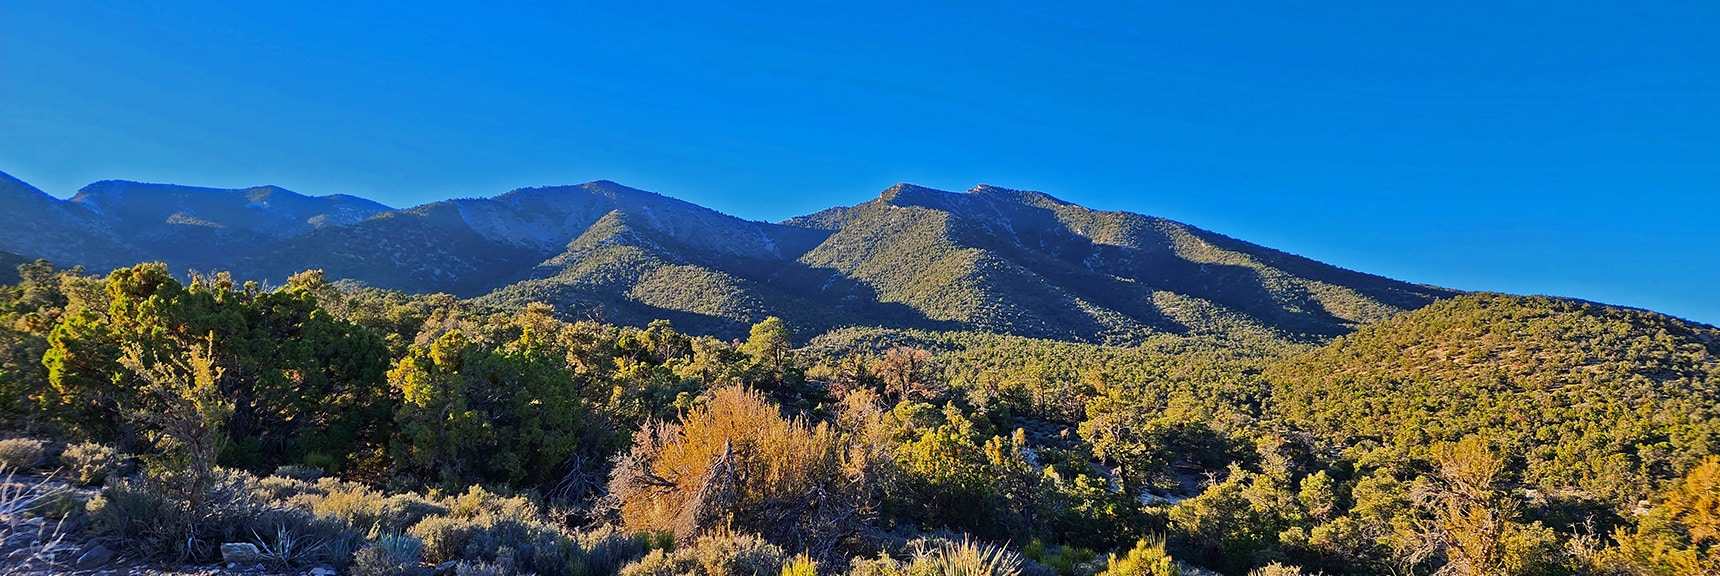 Burnt Peak to Left, El Bastardo to Right. Saddle Between is Destination | Kyle Canyon Grand Crossing | Northern Half | La Madre Mountains Wilderness, Nevada